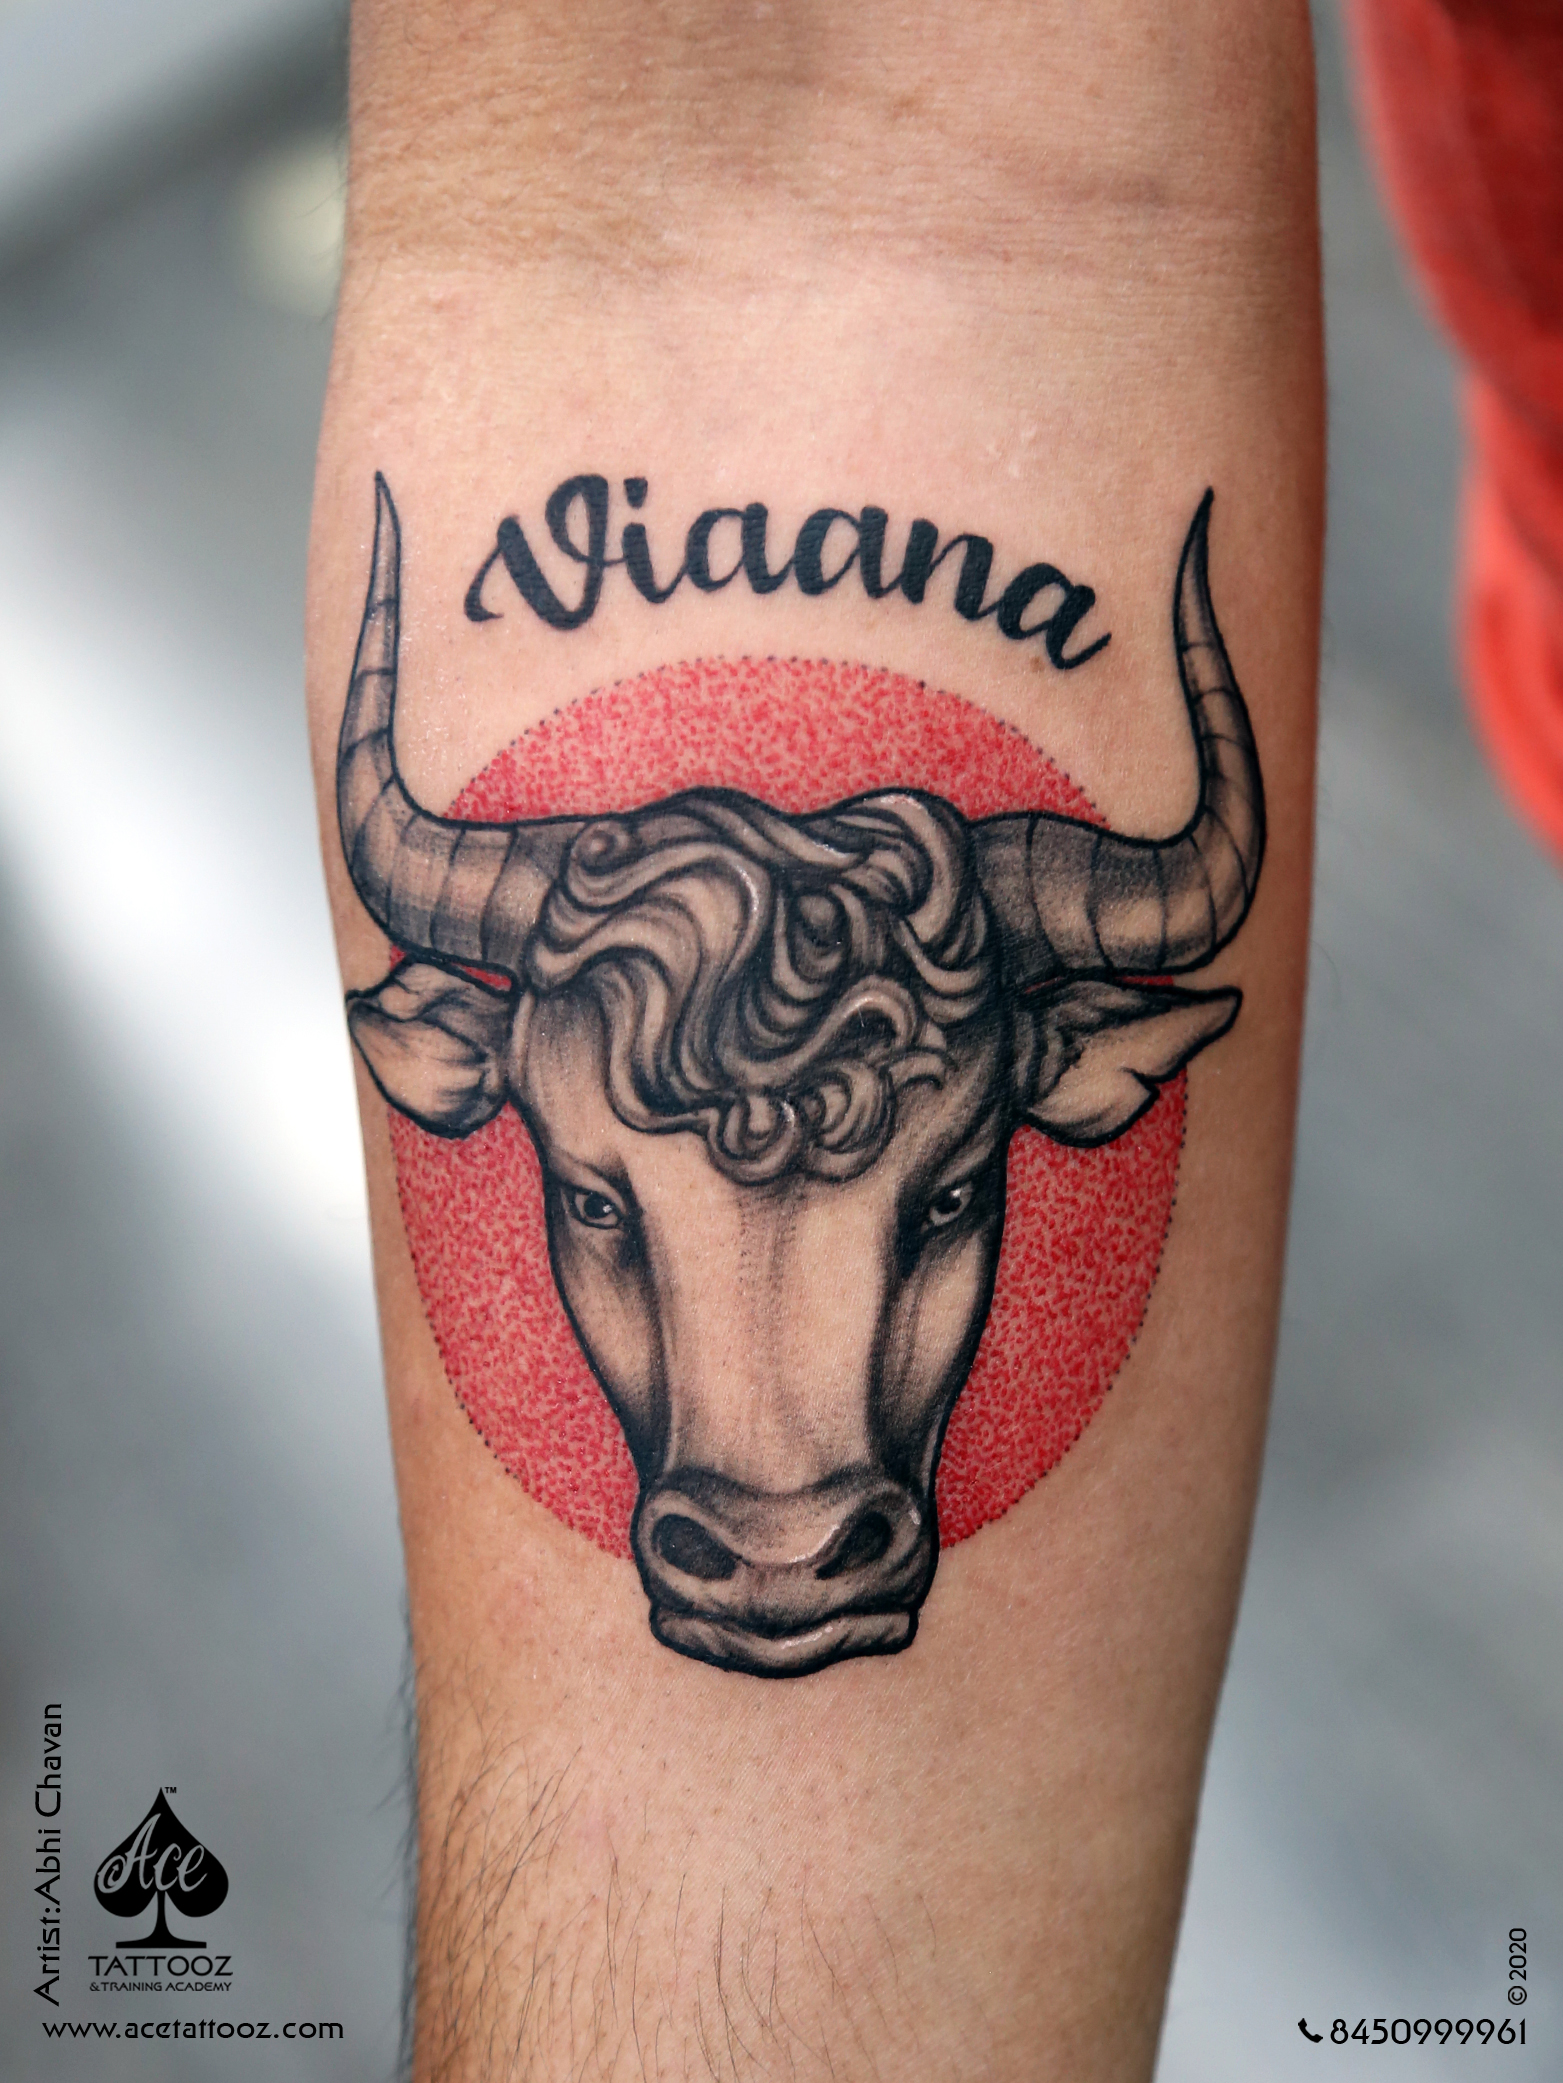 50 Taurus Tattoo Designs And Ideas For Women With Meanings